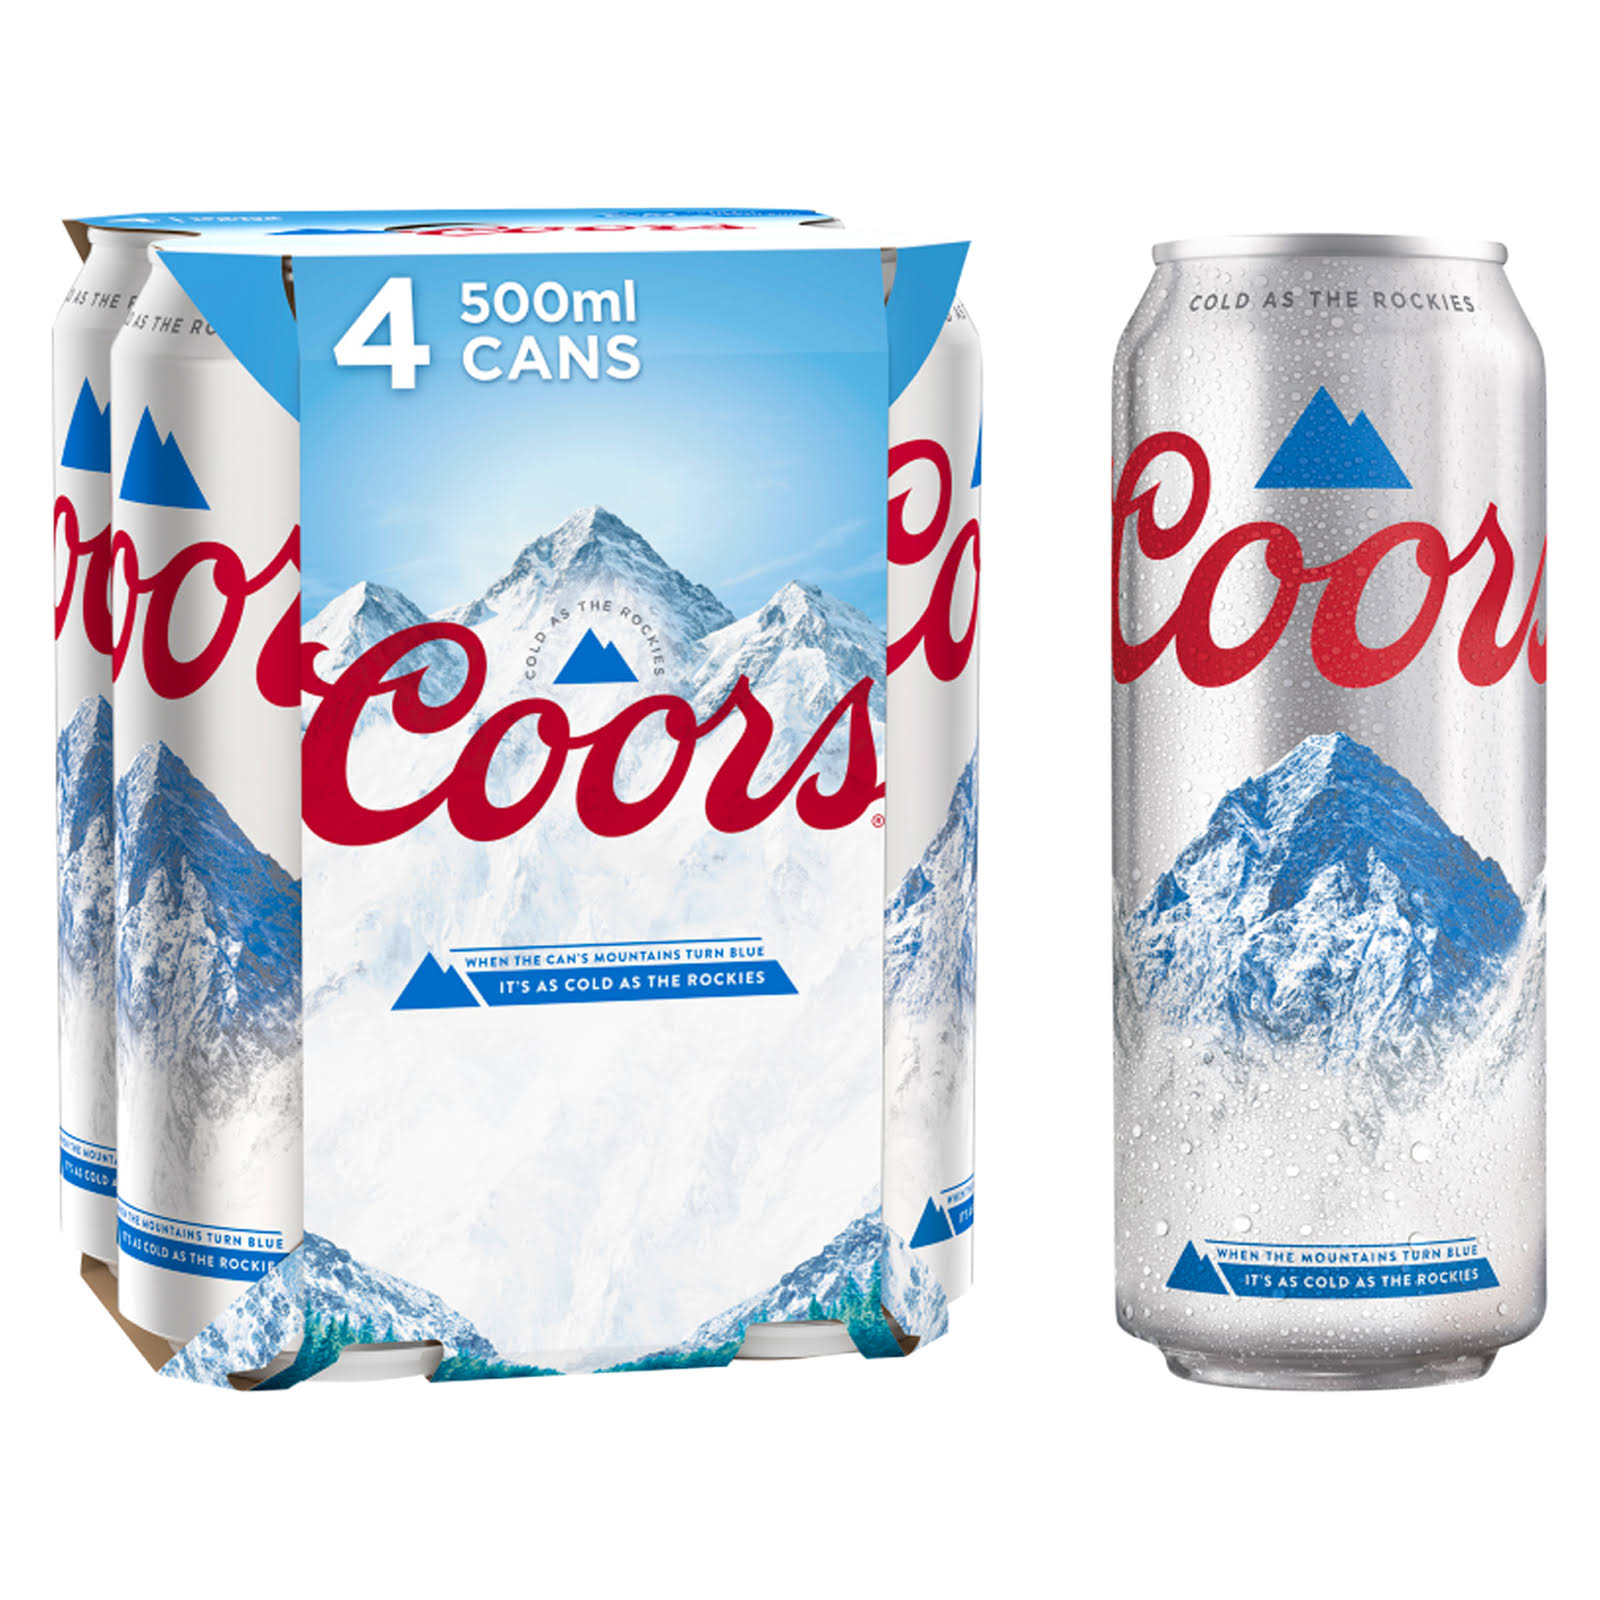 Coors Light Lager Beer - 4 x 500ml